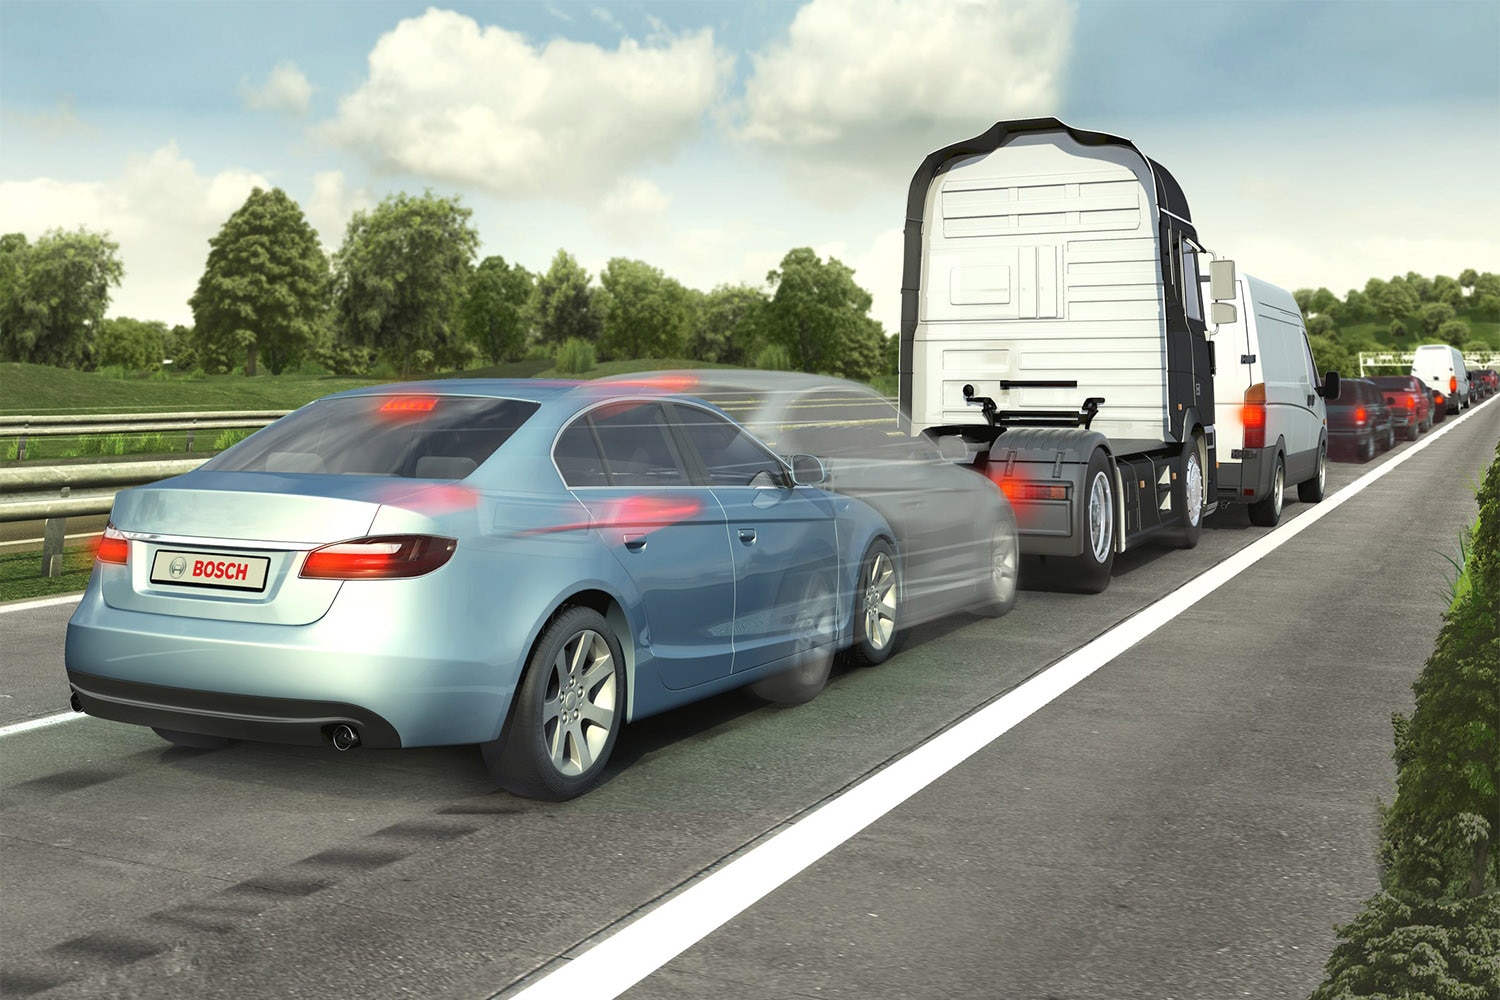 Emergency braking systems, like this one developed by Bosch for use by various carmakers, can help reduce damage in an accident.